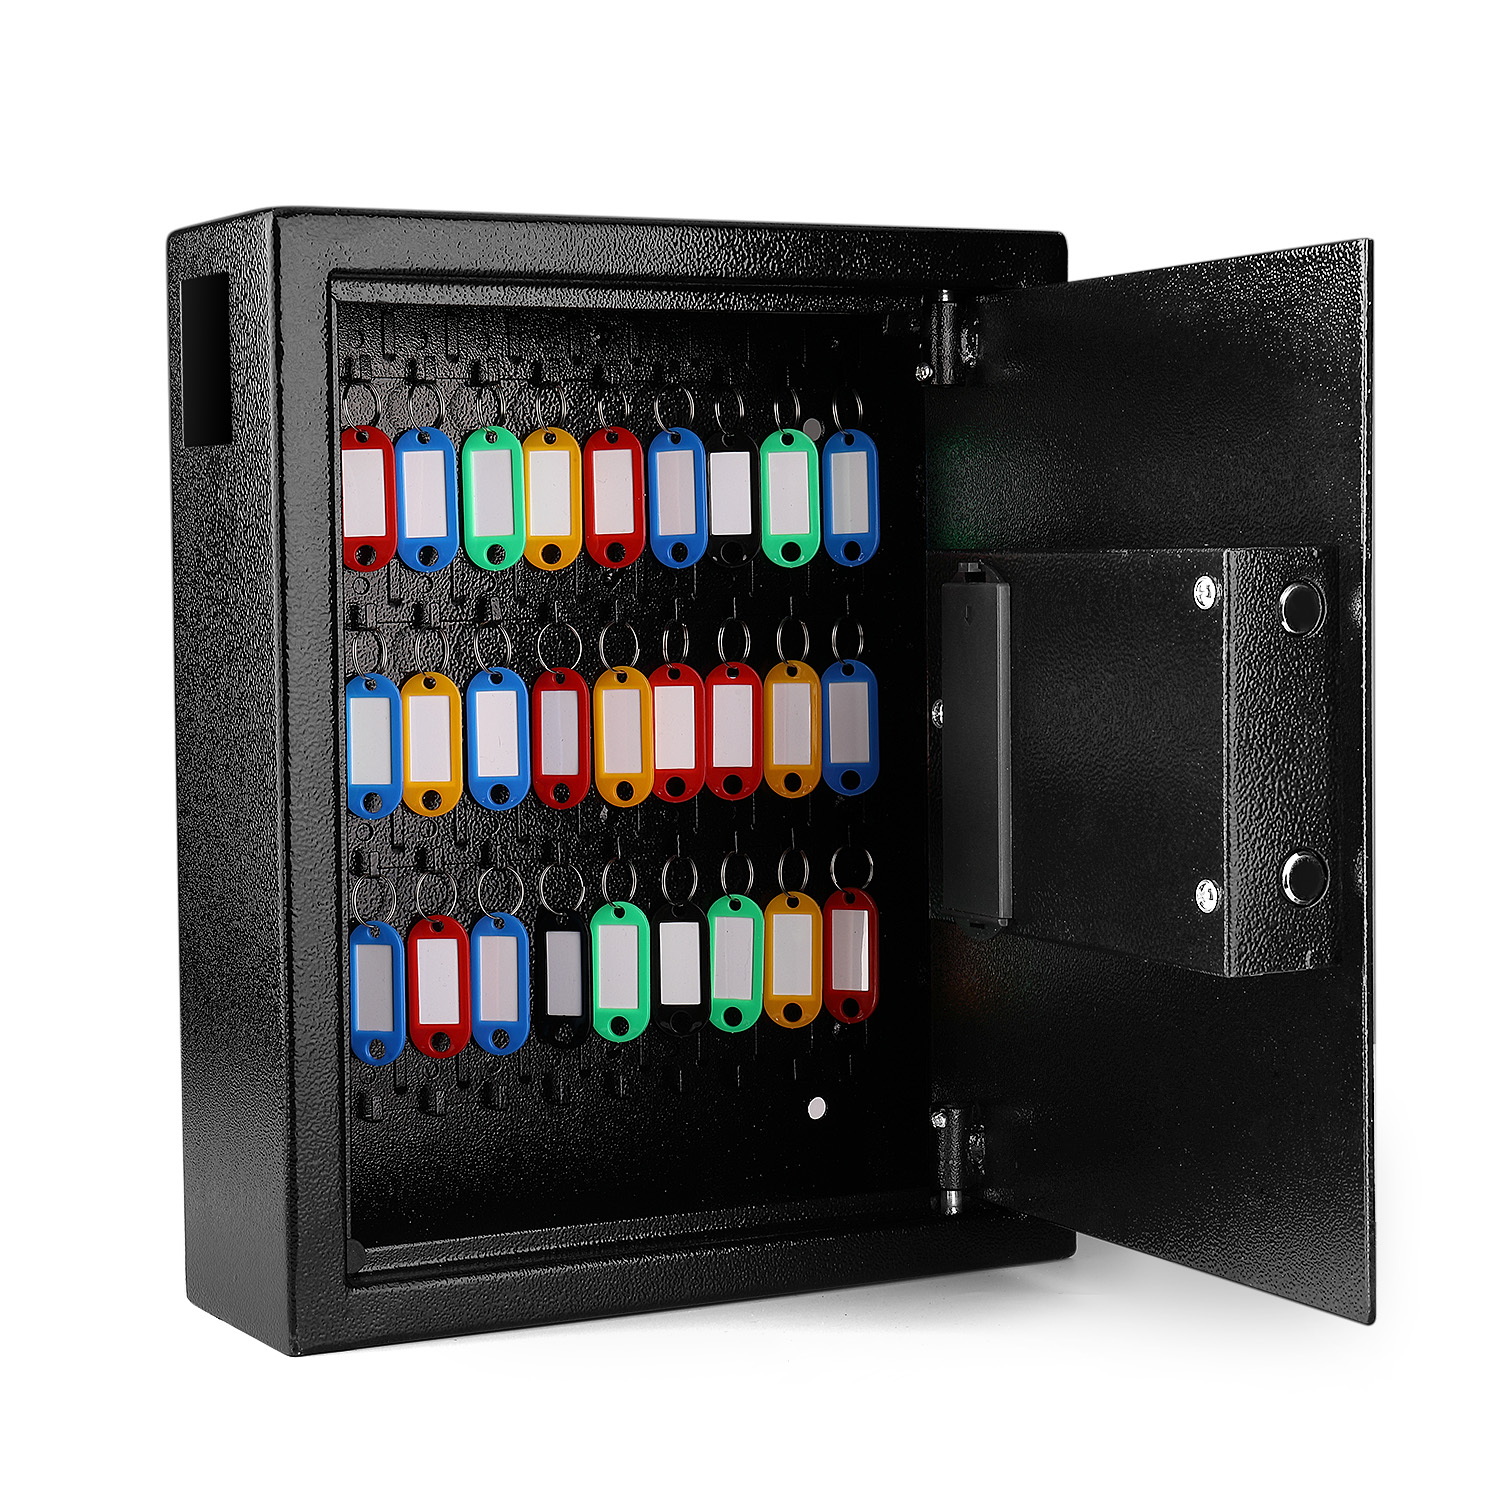 Key Cabinet With A Key Deposit Slot - Key drop slot on the side allows you to deposit the keys without opening the safe. Ideal for home, office, property management, real estate investors, rental car agencies, apartment complex, body shops, and much more